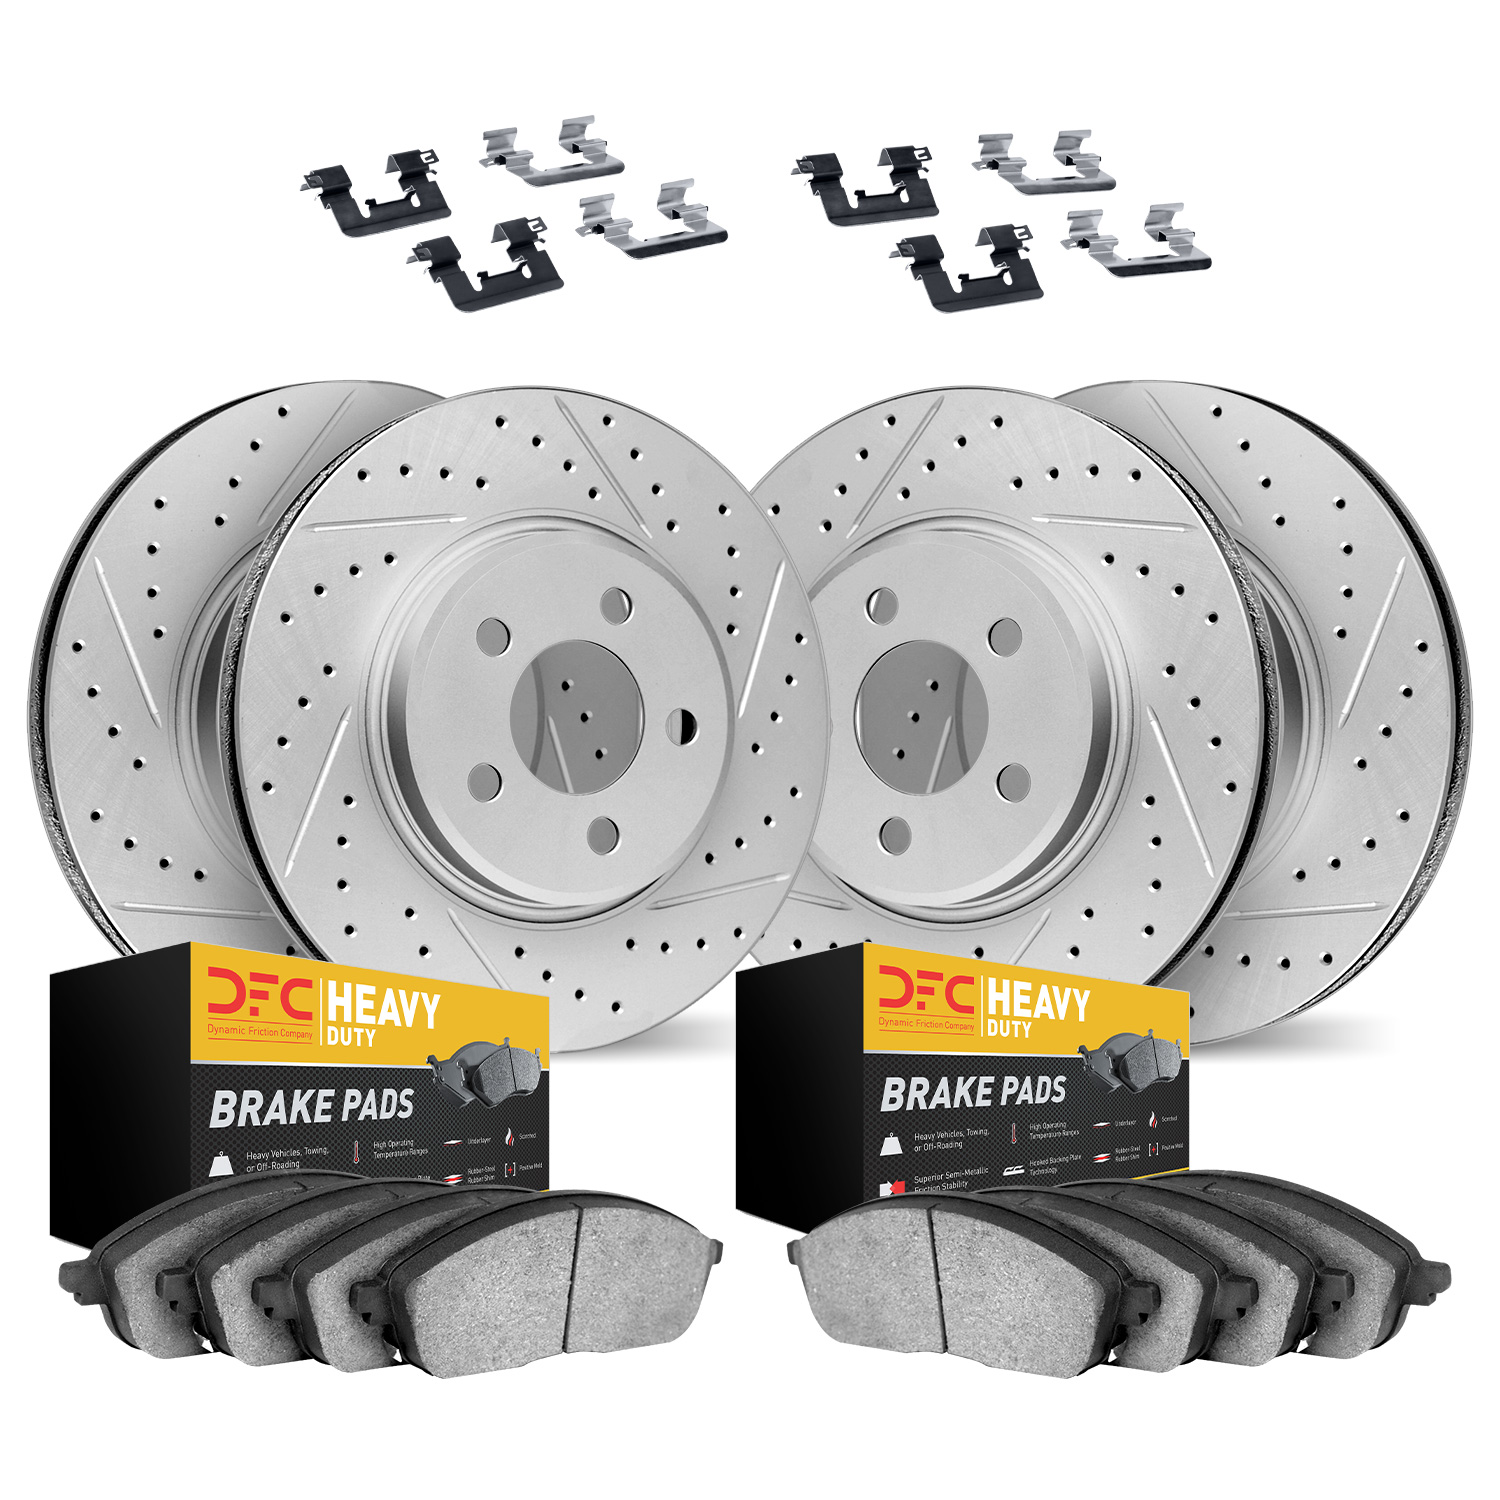 2214-99028 Geoperformance Drilled/Slotted Rotors w/Heavy-Duty Pads Kit & Hardware, 2010-2011 Ford/Lincoln/Mercury/Mazda, Positio